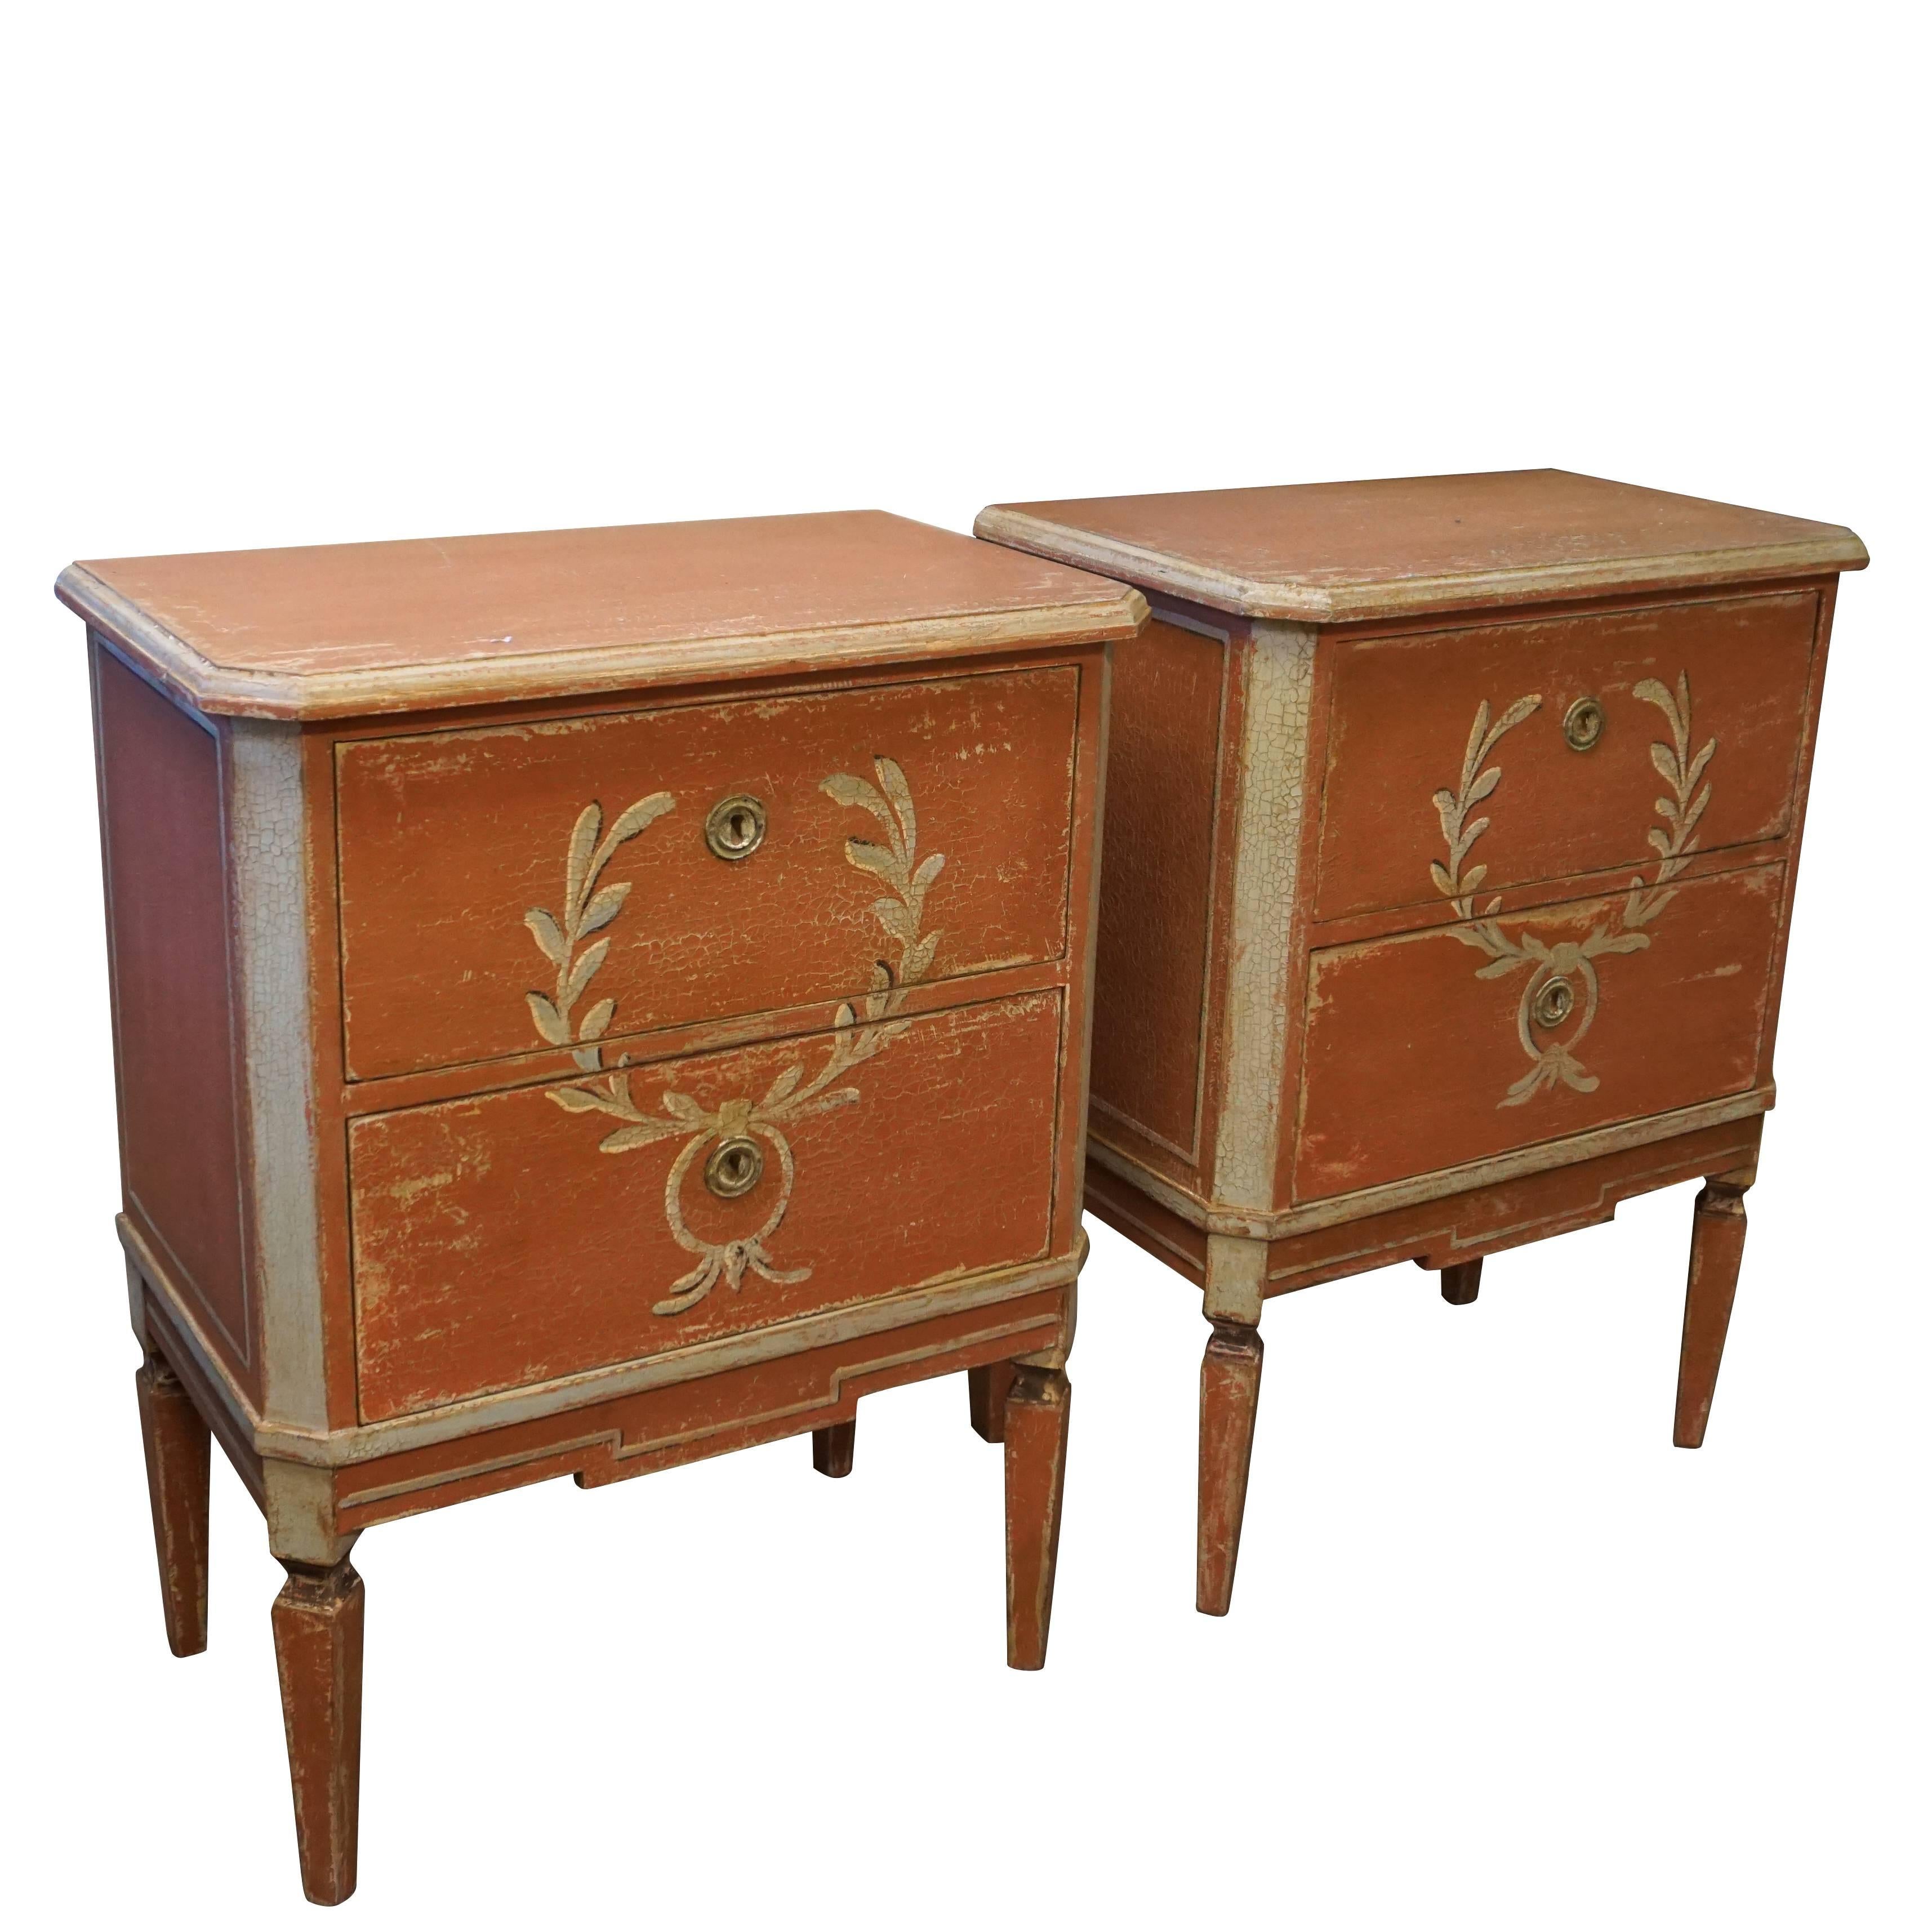 A pair of petite restored Gustavian style chests with two drawers each on tapered legs with an hand-painted centered Empire decor on the front surface,
Sweden, Scandinavia.